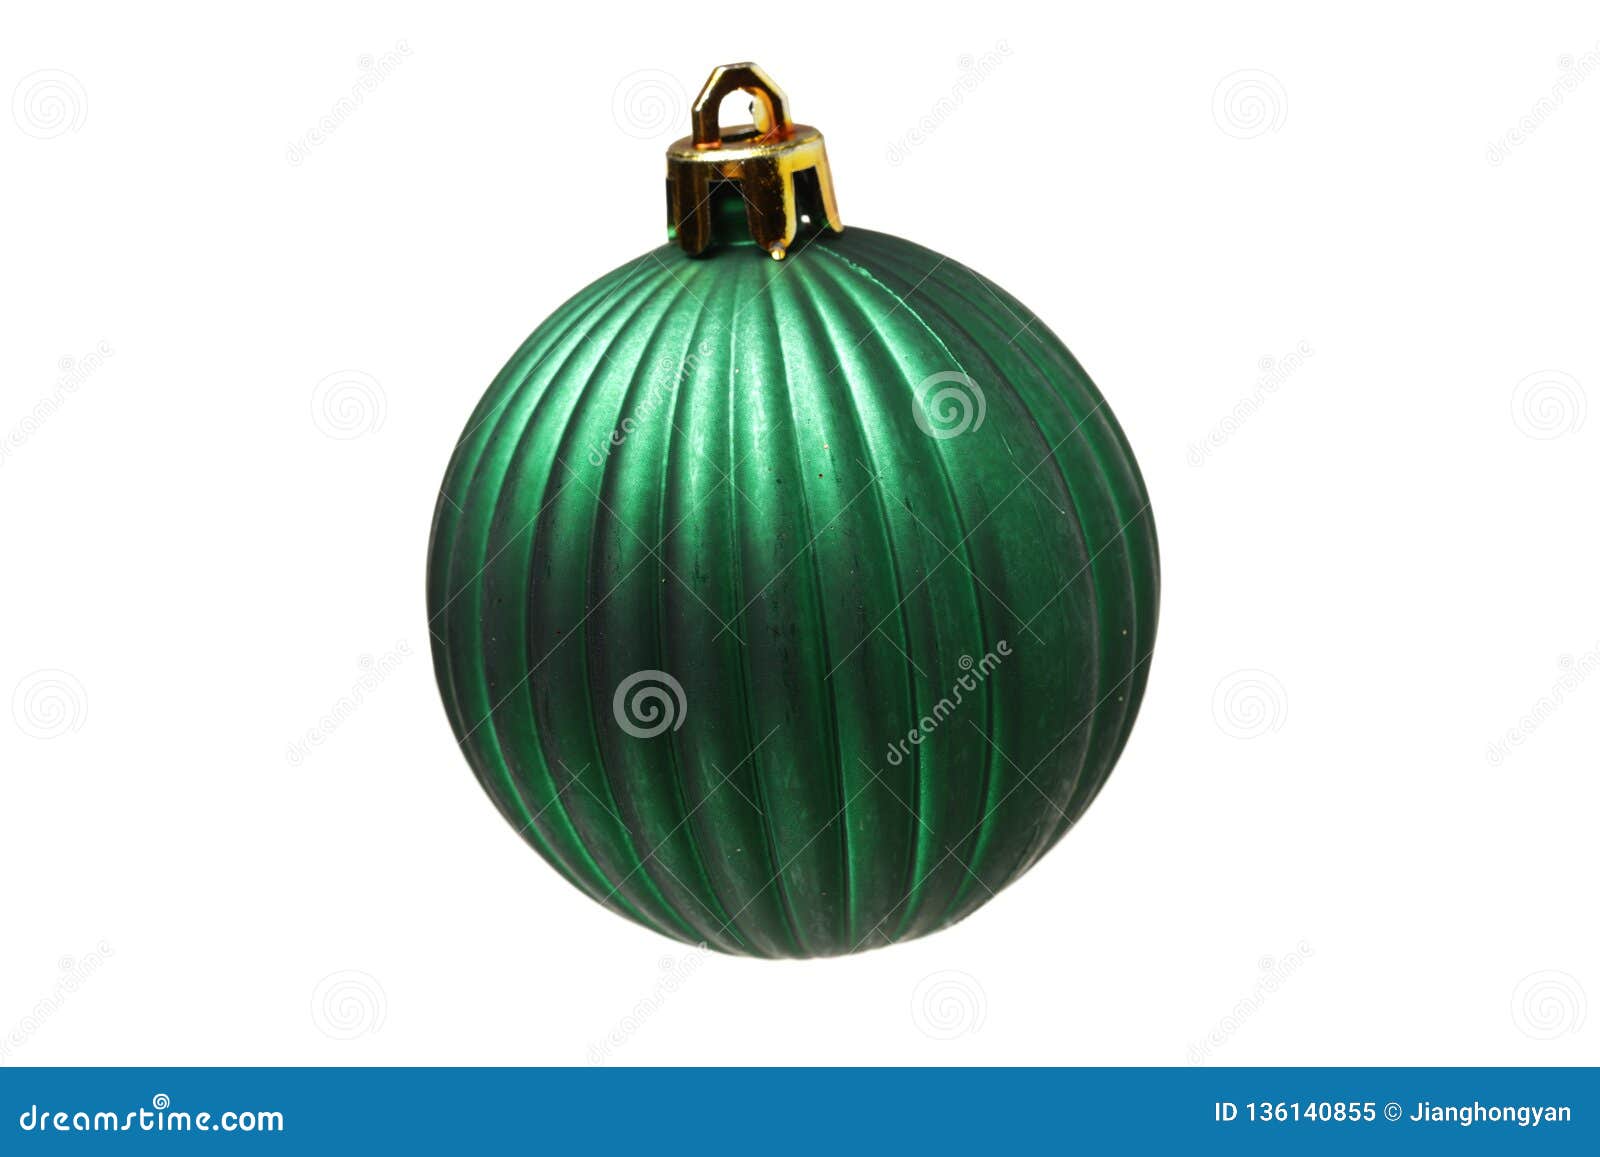 Colorful Green Christmas Decoration Baubles Stock Image - Image of ...